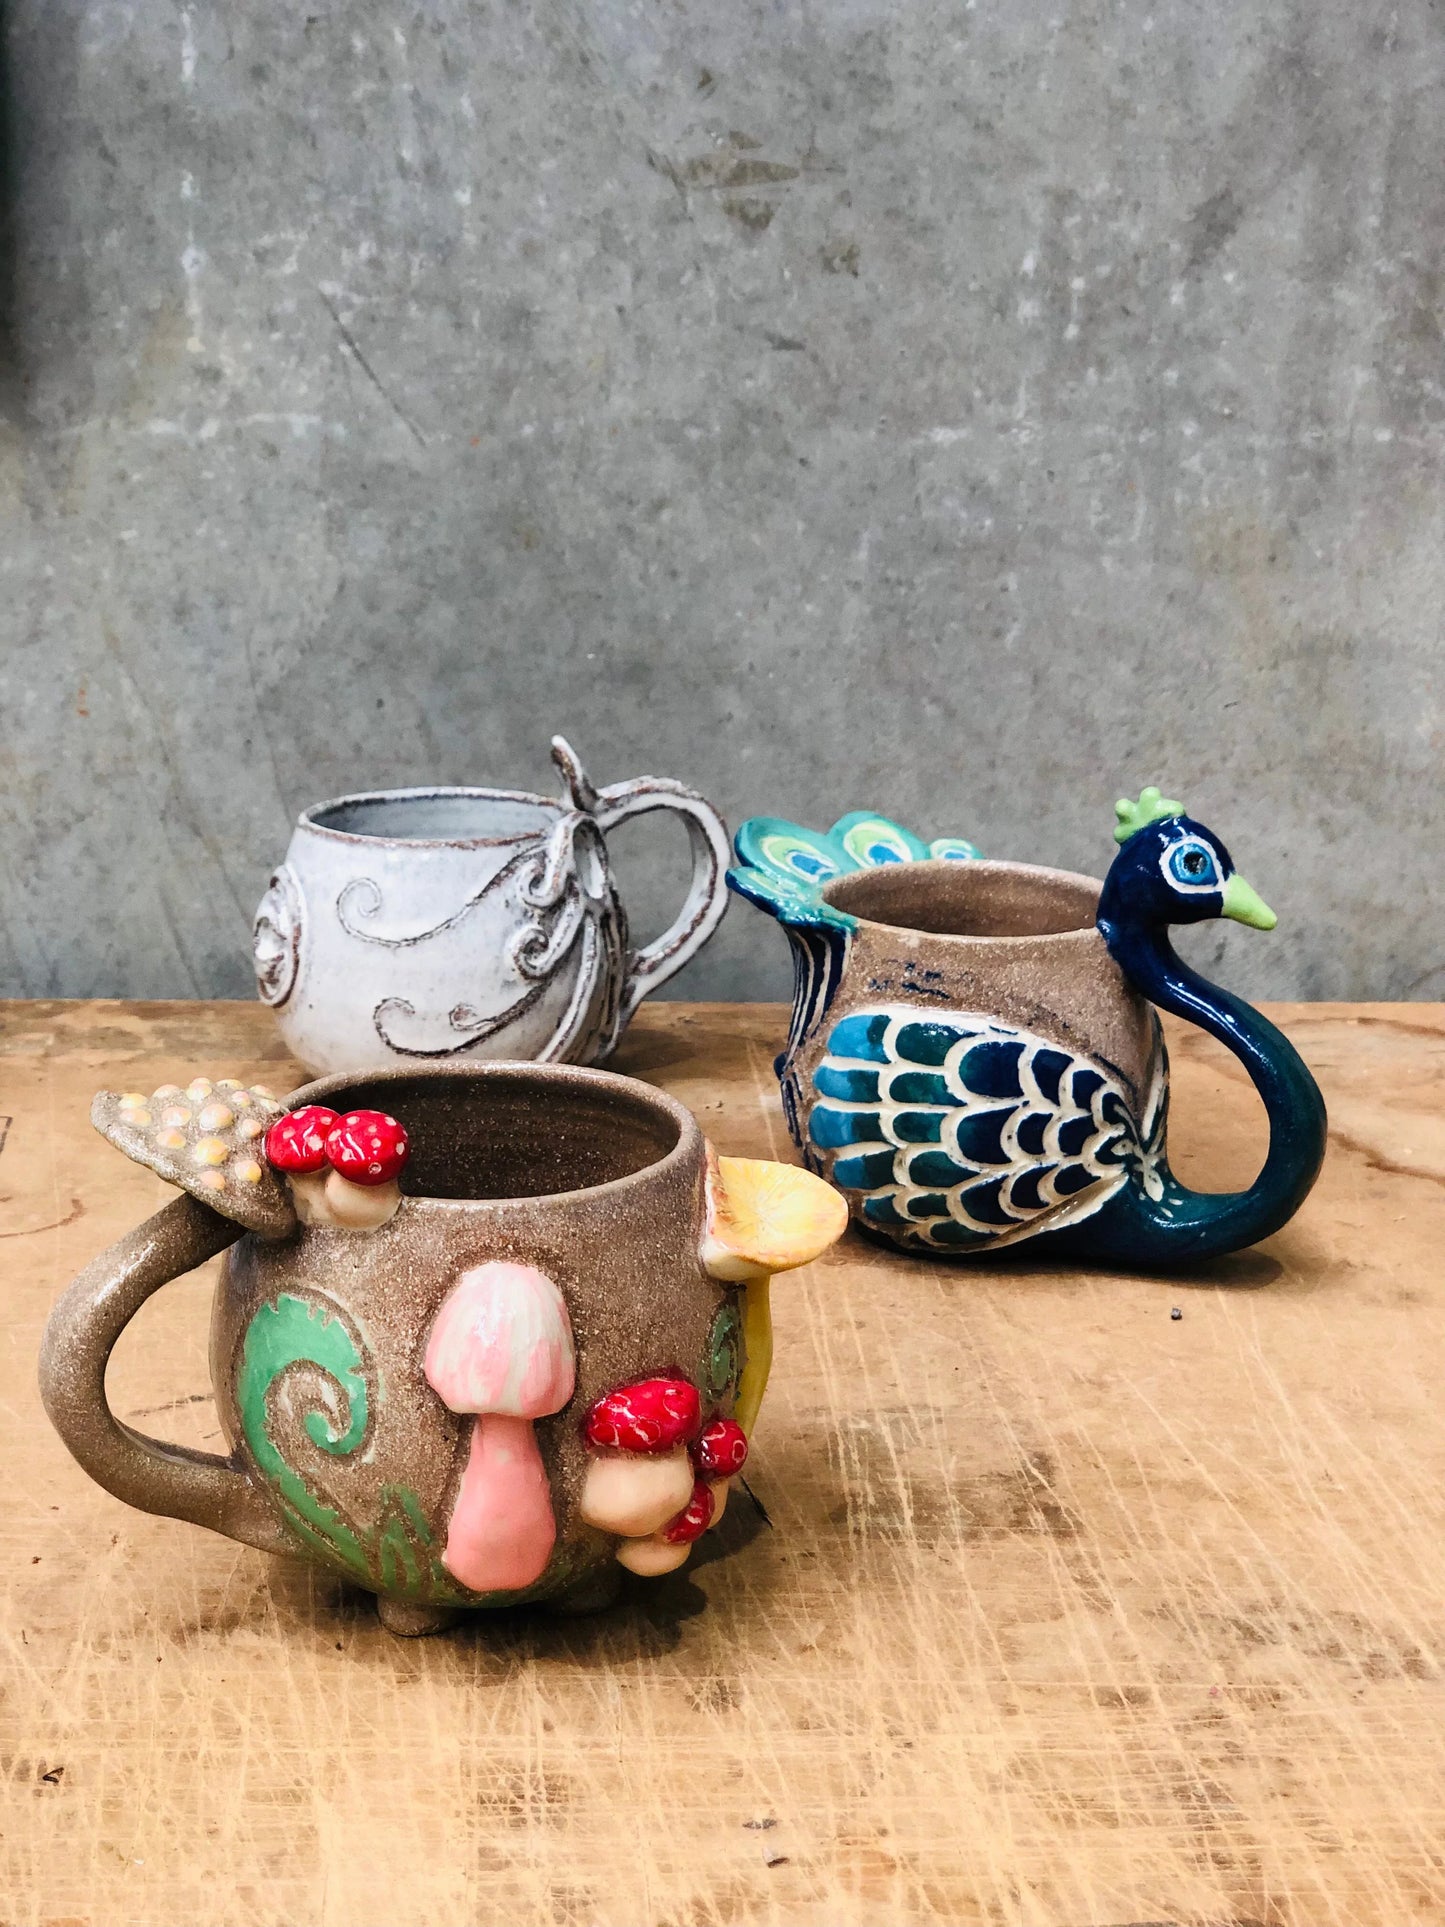 Marvellous Mugs, Crystal Cups and Creative Candle Holder Workshop - Friday 31st May 6:30 - 8:30pm